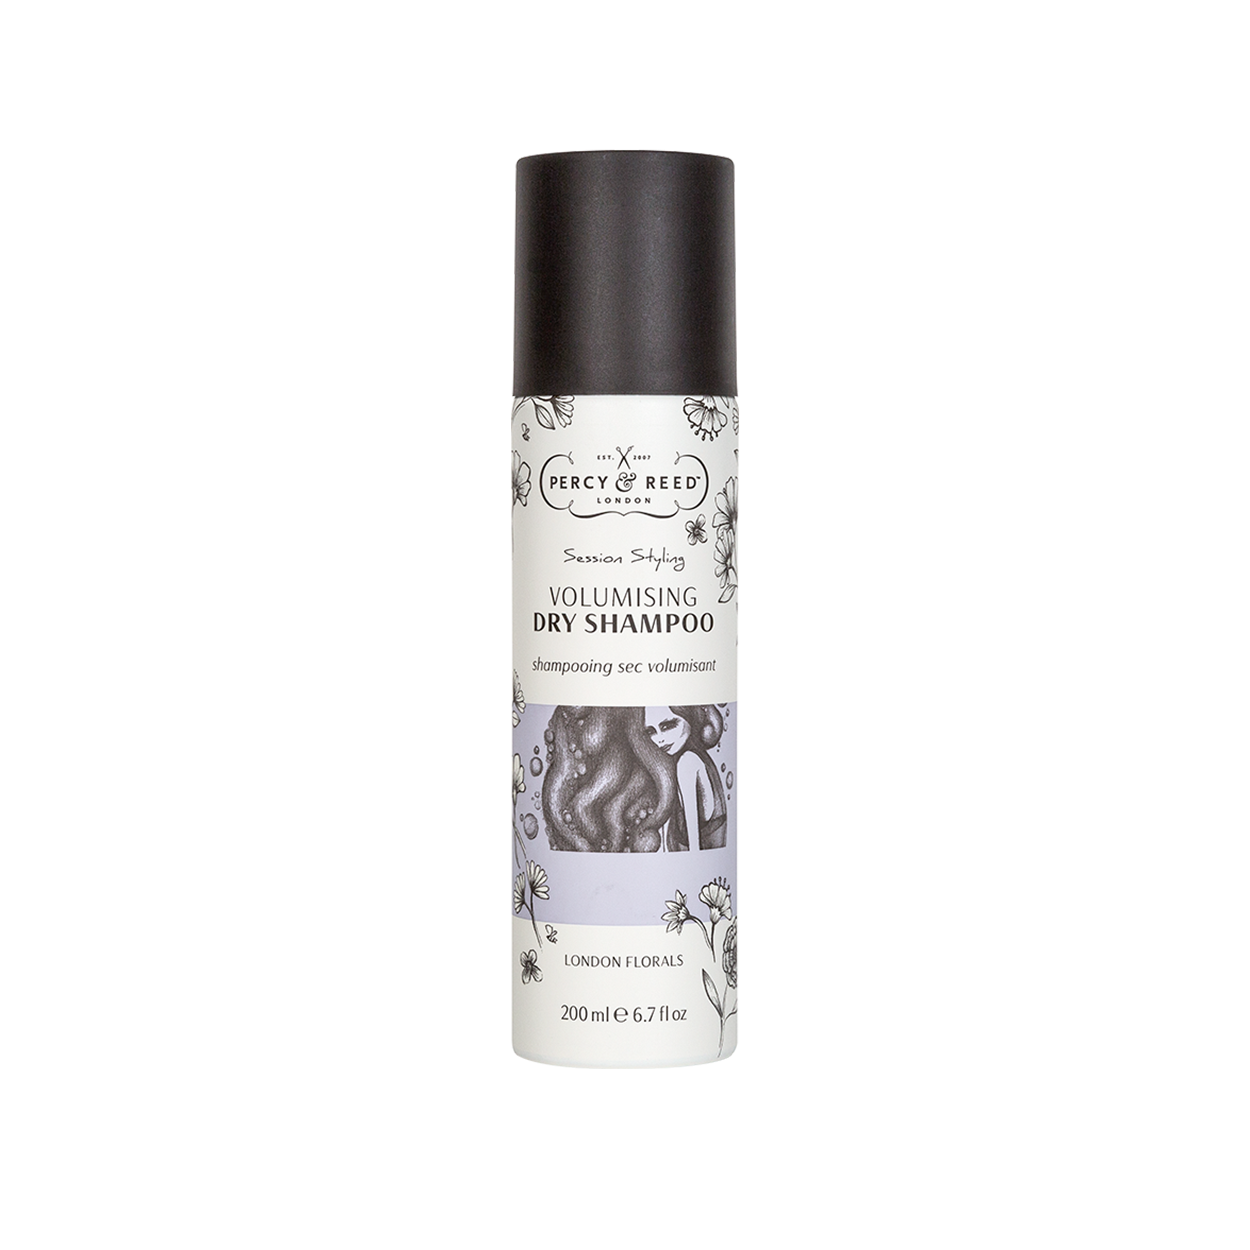 Percy & Reed Session Styling Volumising Dry Shampoo - London Florals E